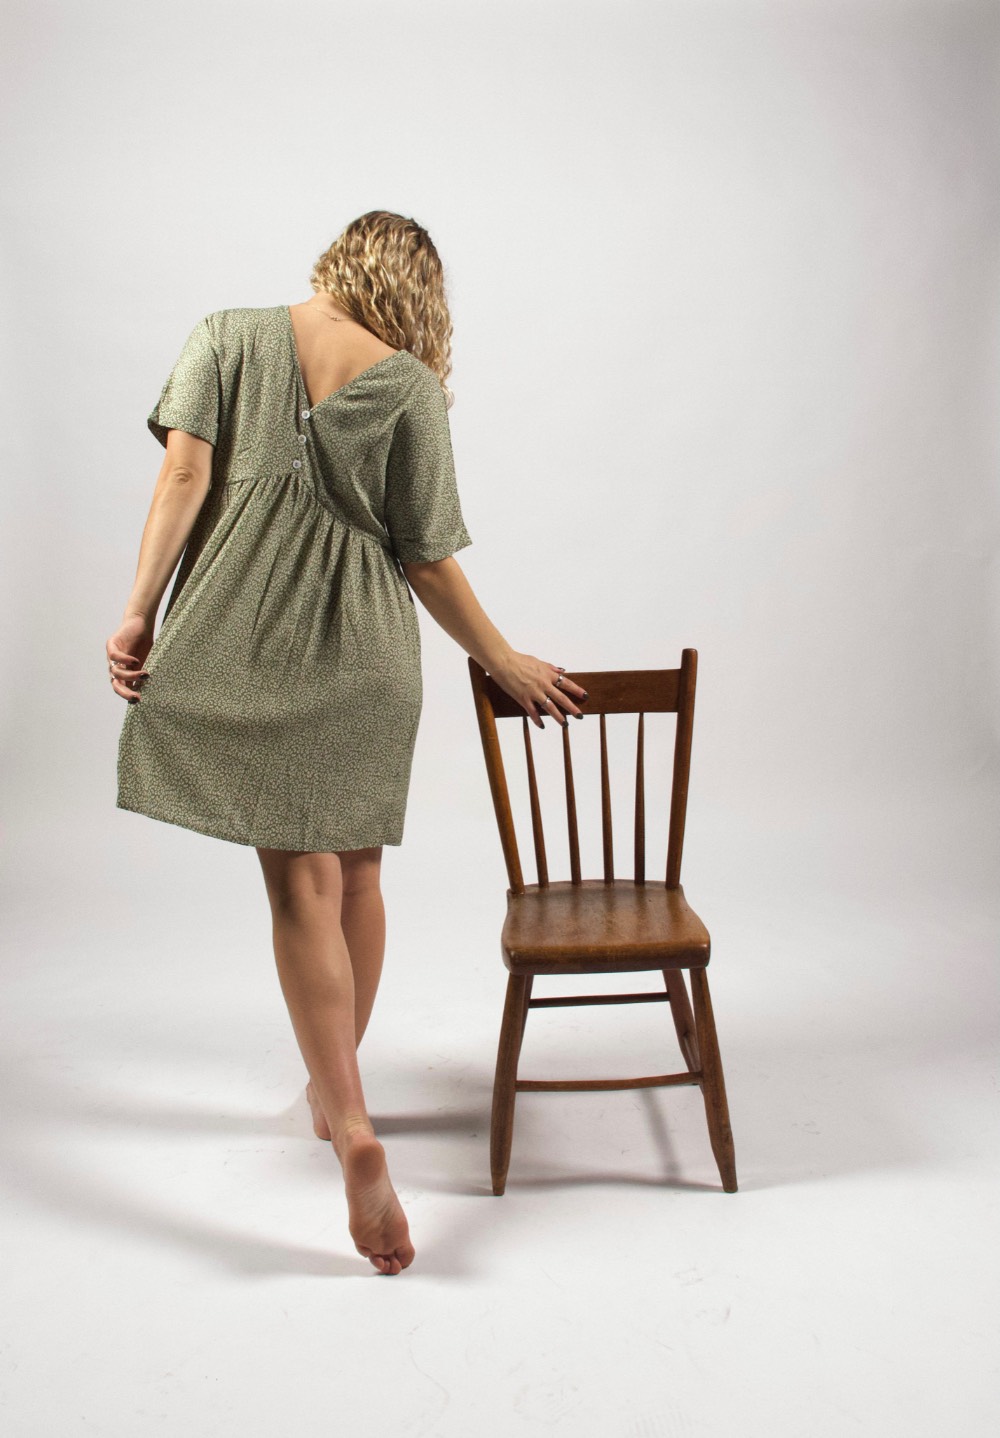 The back of a woman in a green dress with one hand on a wooden chair.